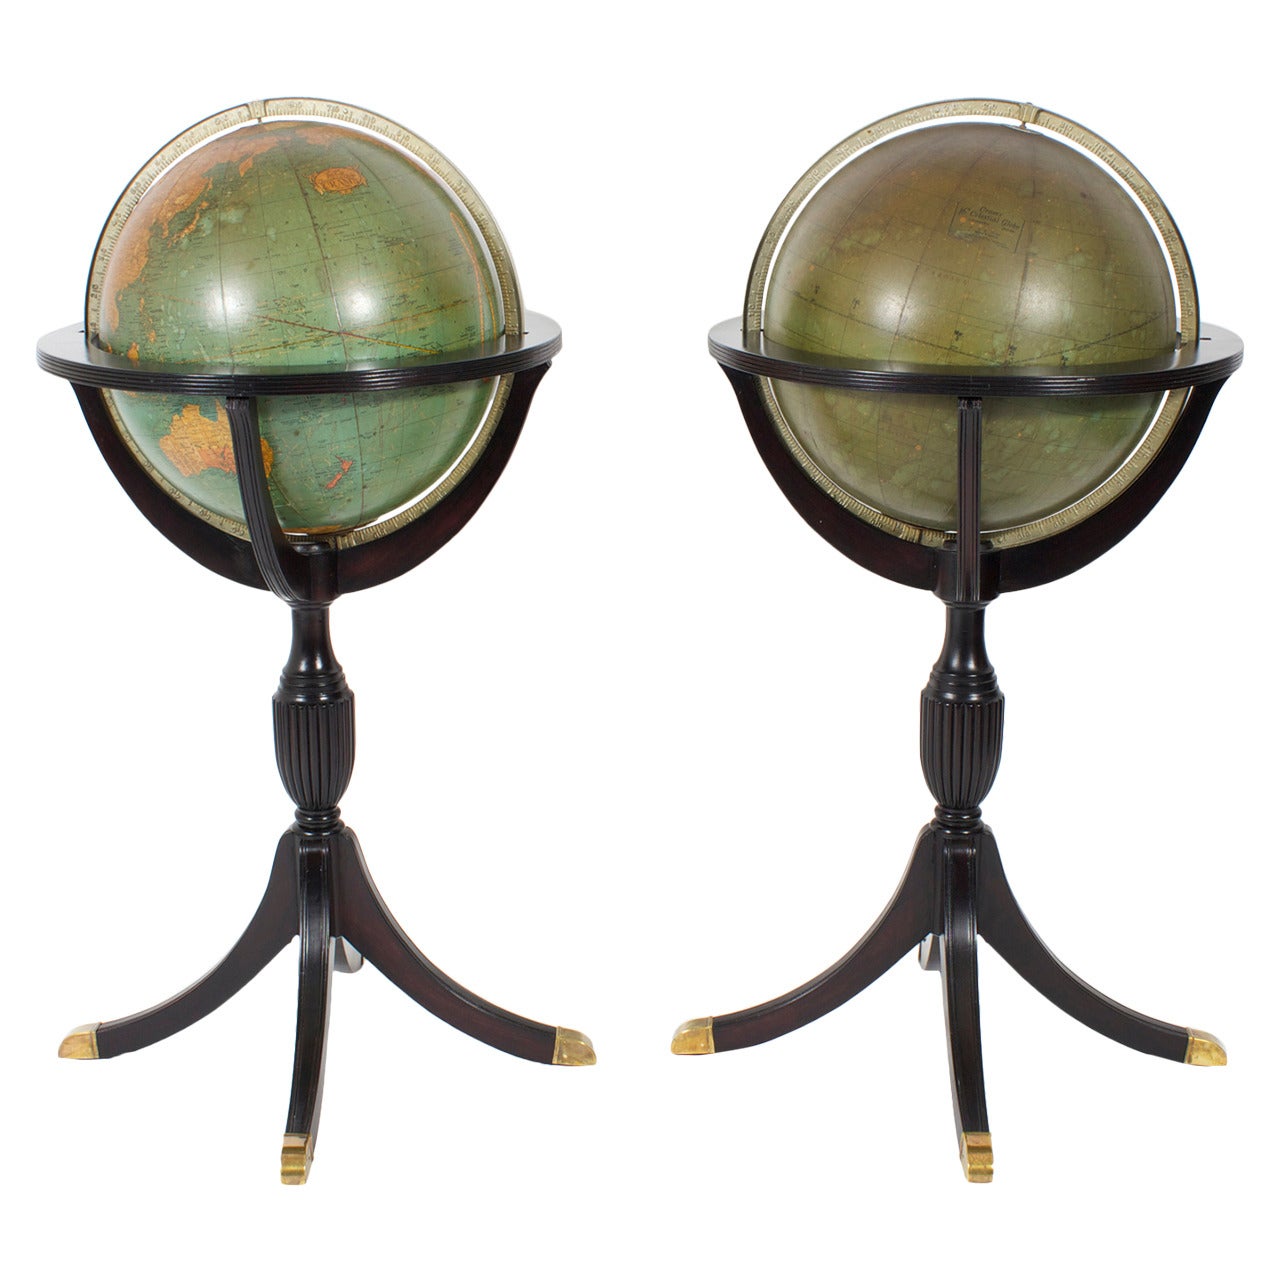 Rare Pair of Vintage Scholastic Globes in Ebonized Stands